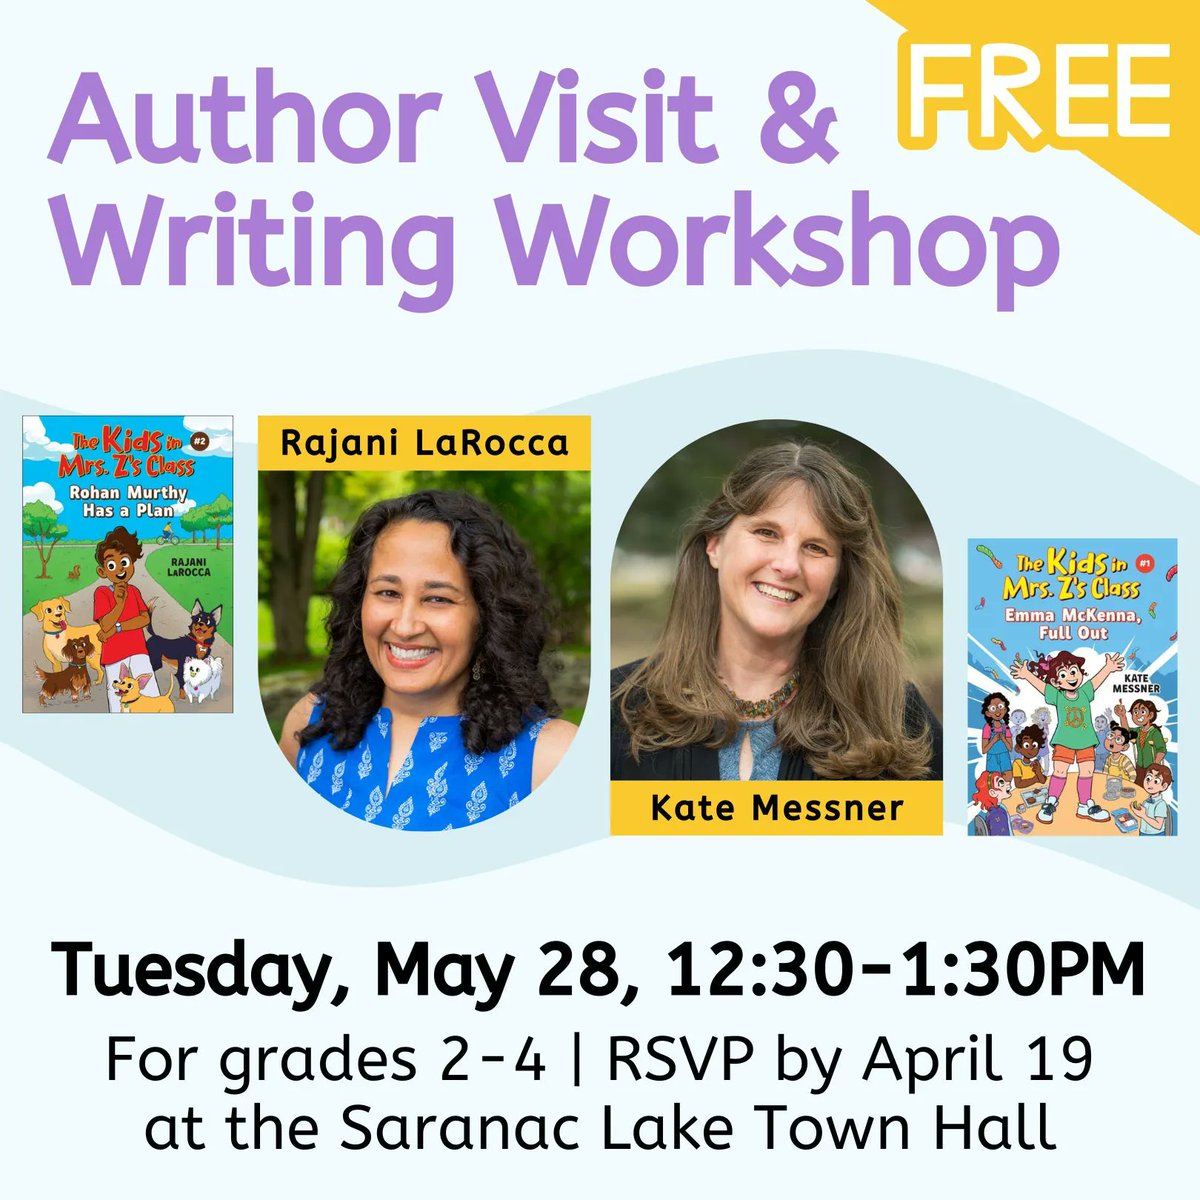 Northern NY friends! @rajanilarocca & I are offering a FREE in-person author visit & writing workshop for students in May! Hosted by the @adkctr4writing, we'll be at Saranac Lake Town Hall May 28th at 12:30pm. Learn more & sign up to join us here: adirondackcenterforwriting.org/event/author-v…